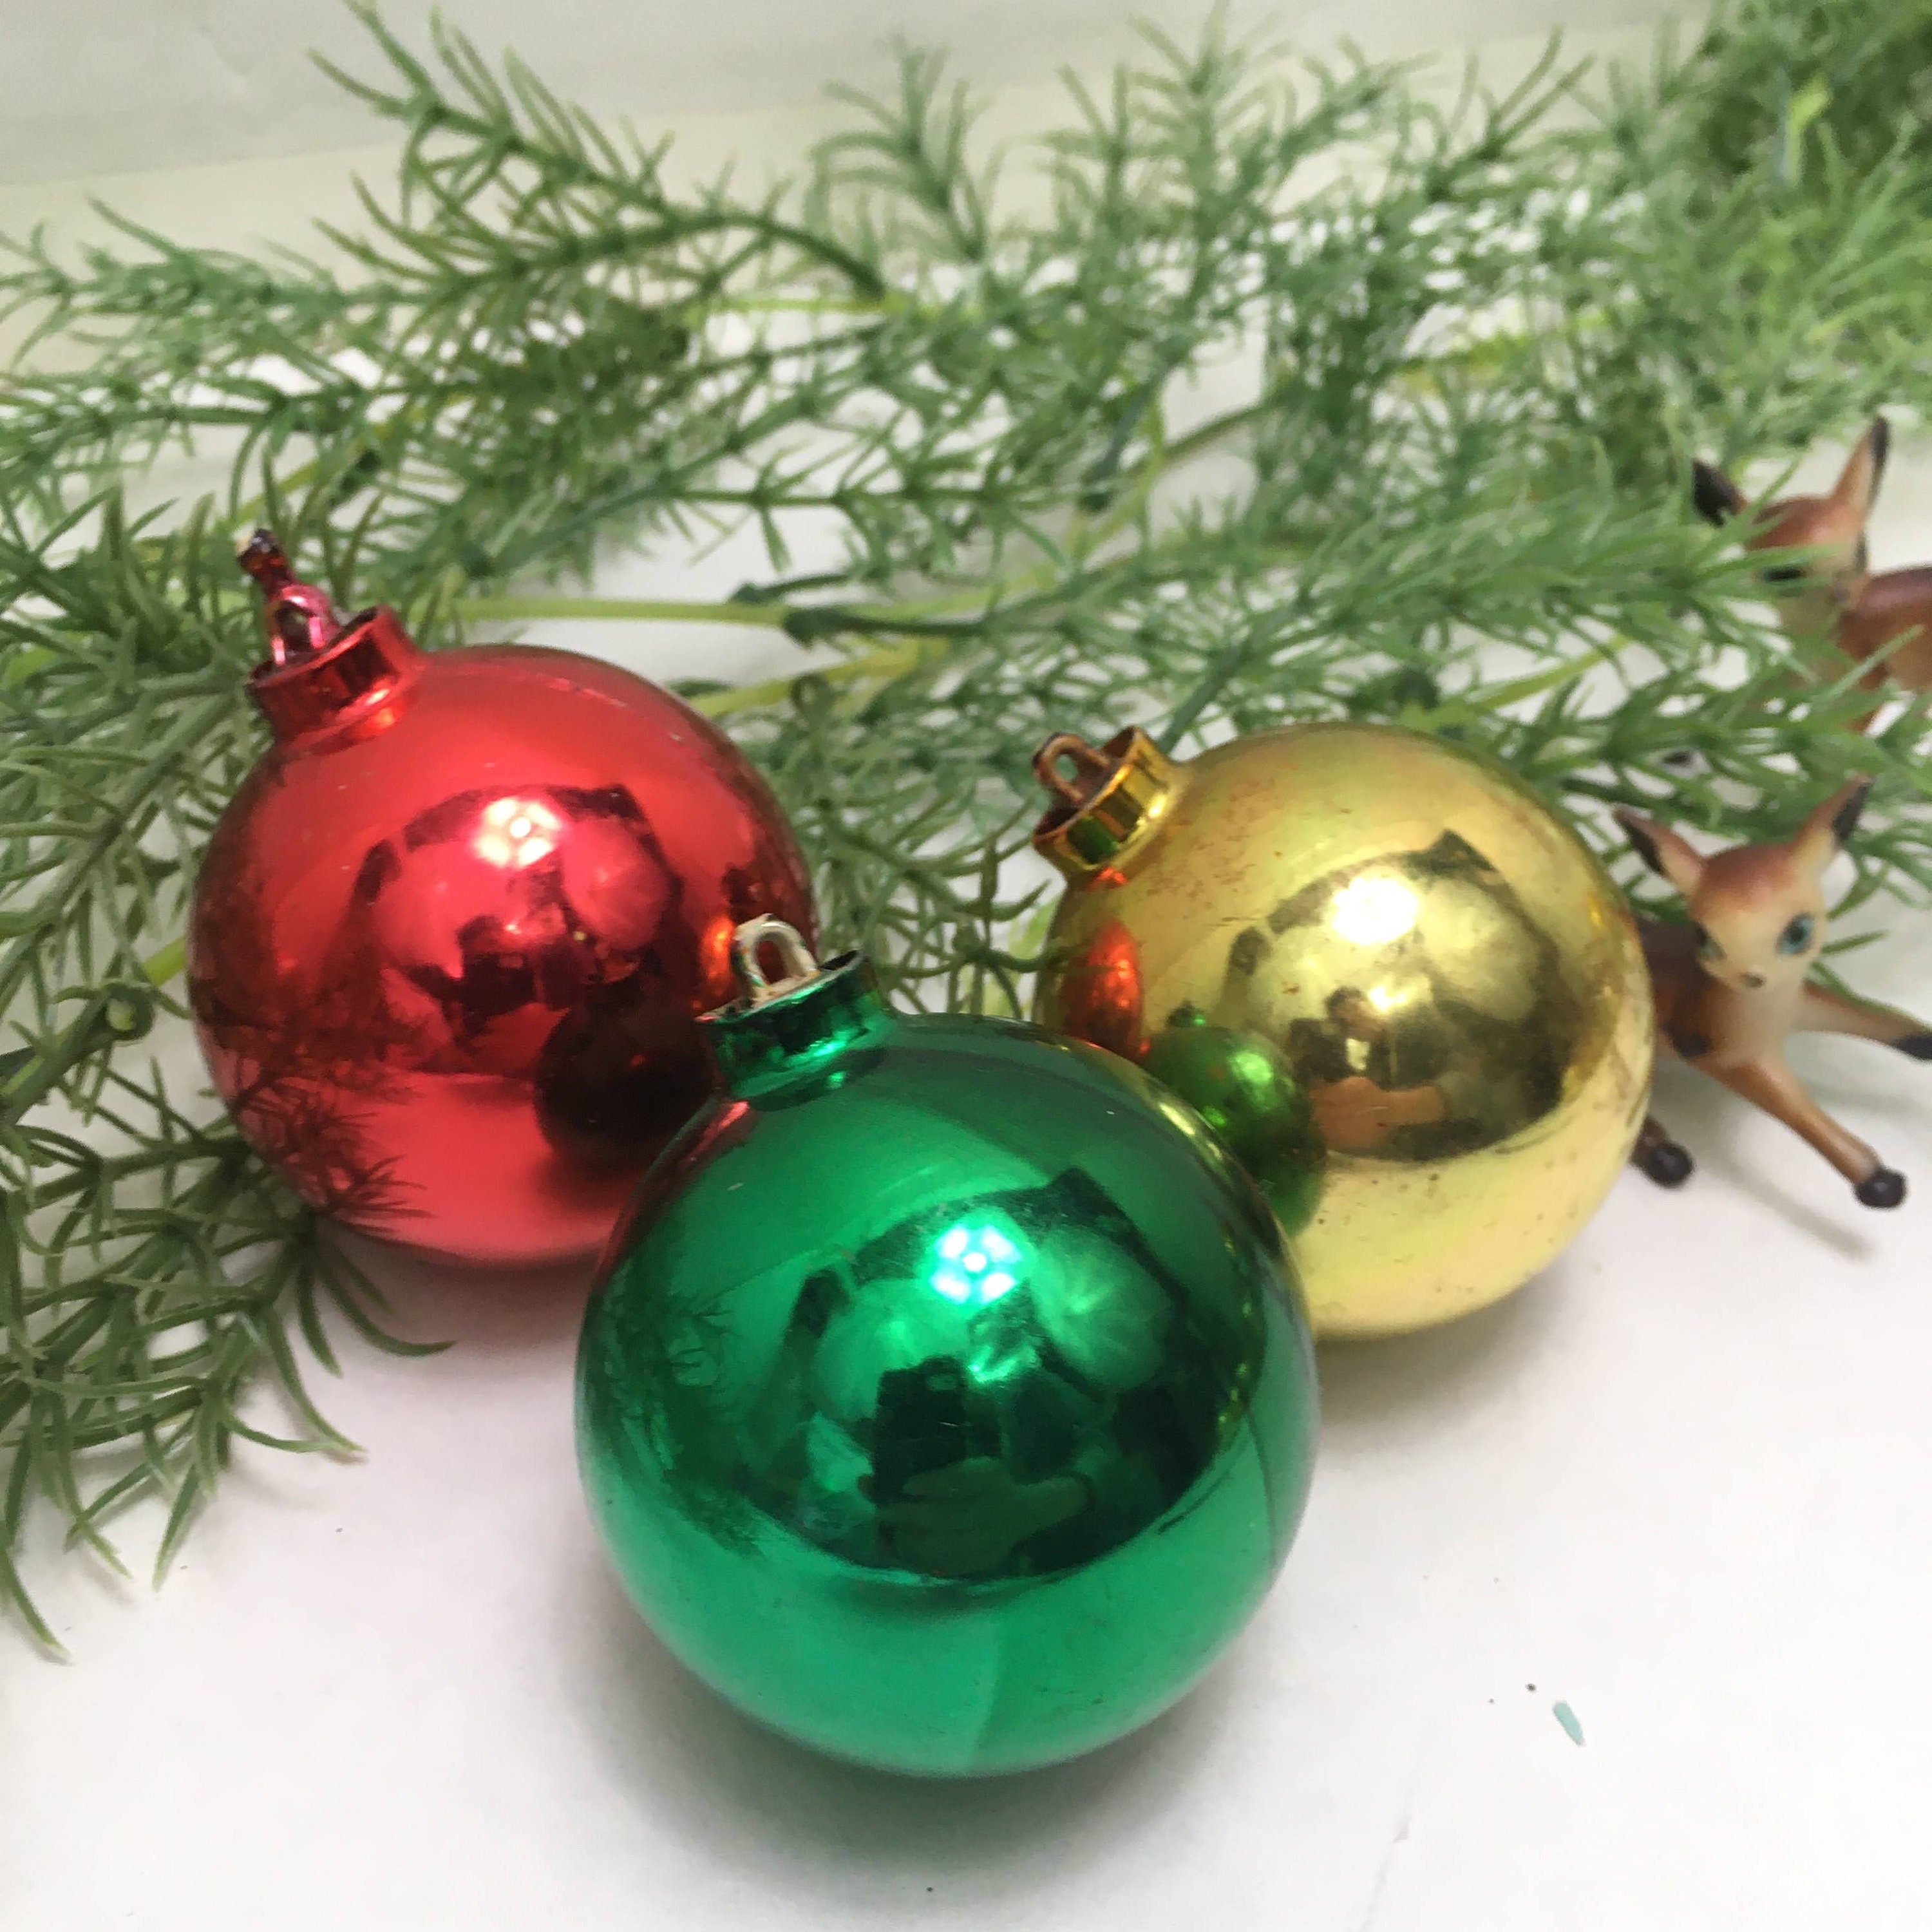 3 Shiny Vintage Unbreakable Ornaments in Red Green and Gold